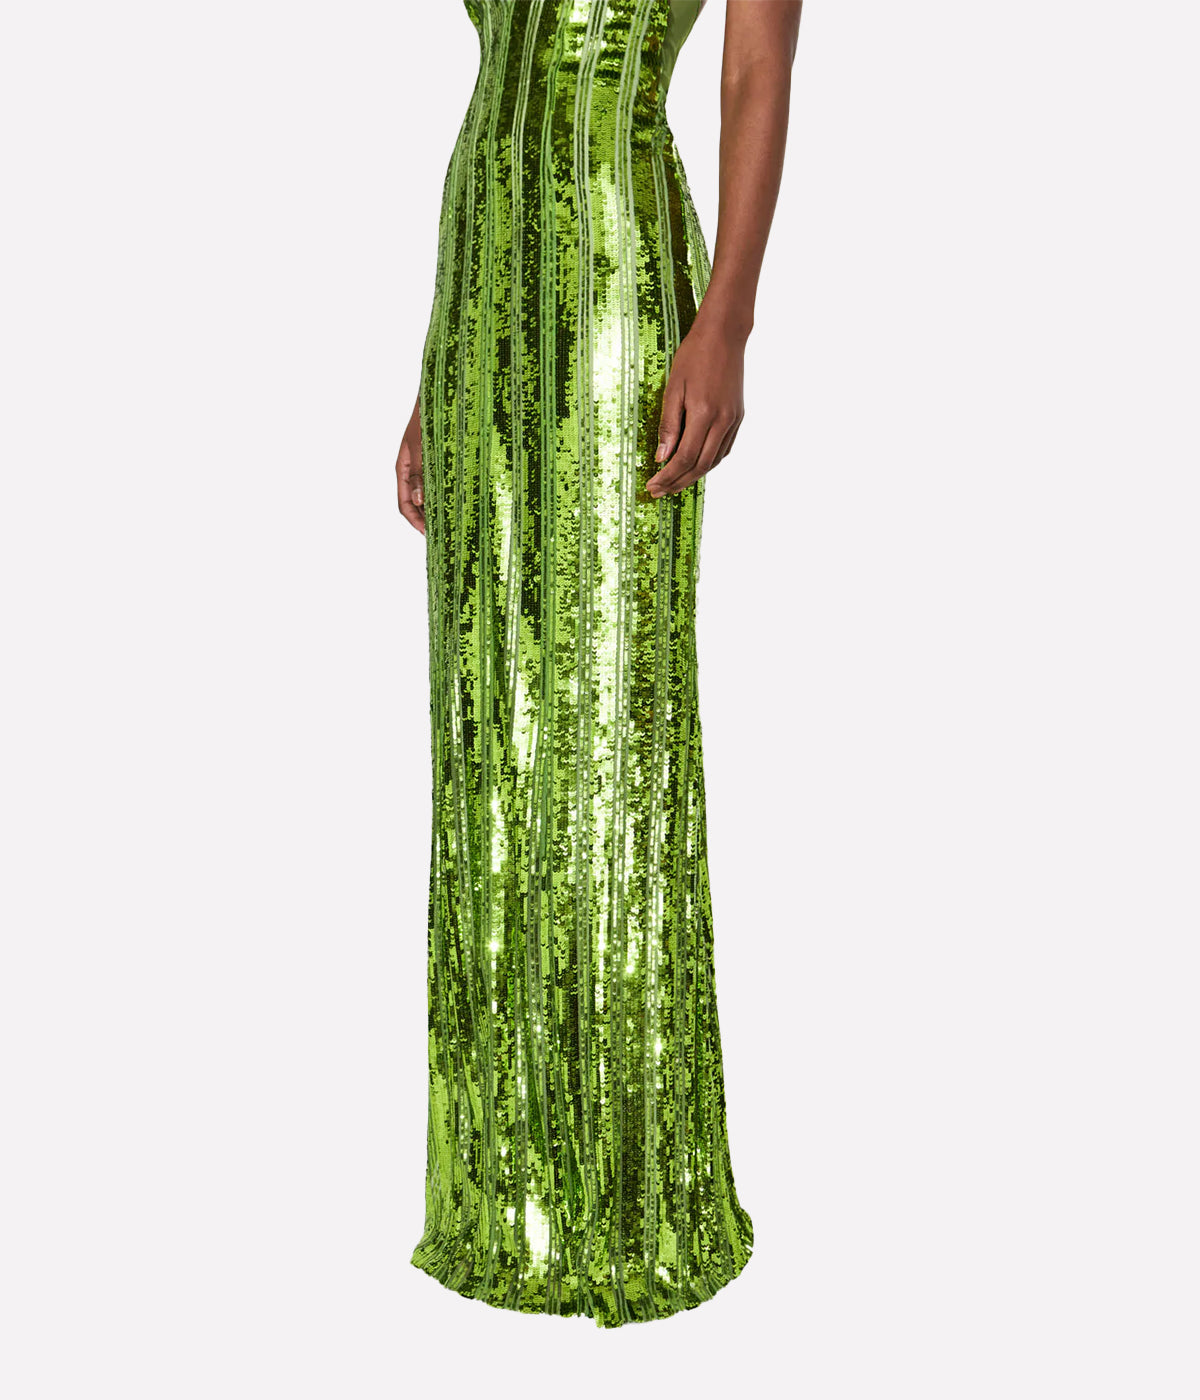 Kate Dress in Bright Green